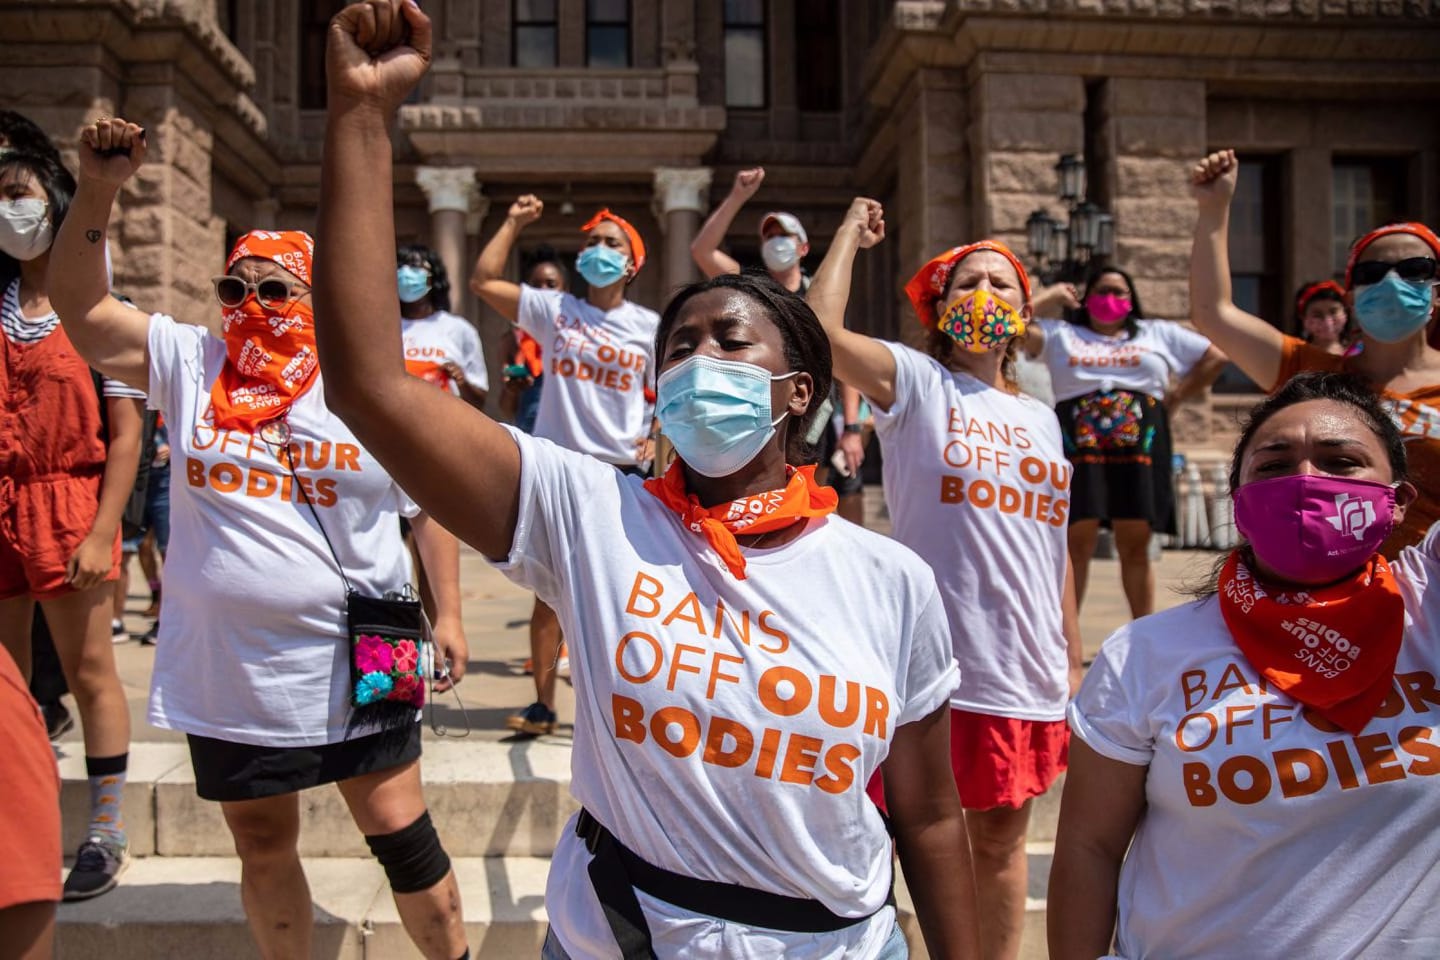 A “Bans Off Our Bodies” protested at the Texas State Capitol in Austin on Wednesday. A Texas law prohibiting most abortions after about six weeks of pregnancy went into effect on Wednesday after the Supreme Court failed to act on a request to block it.